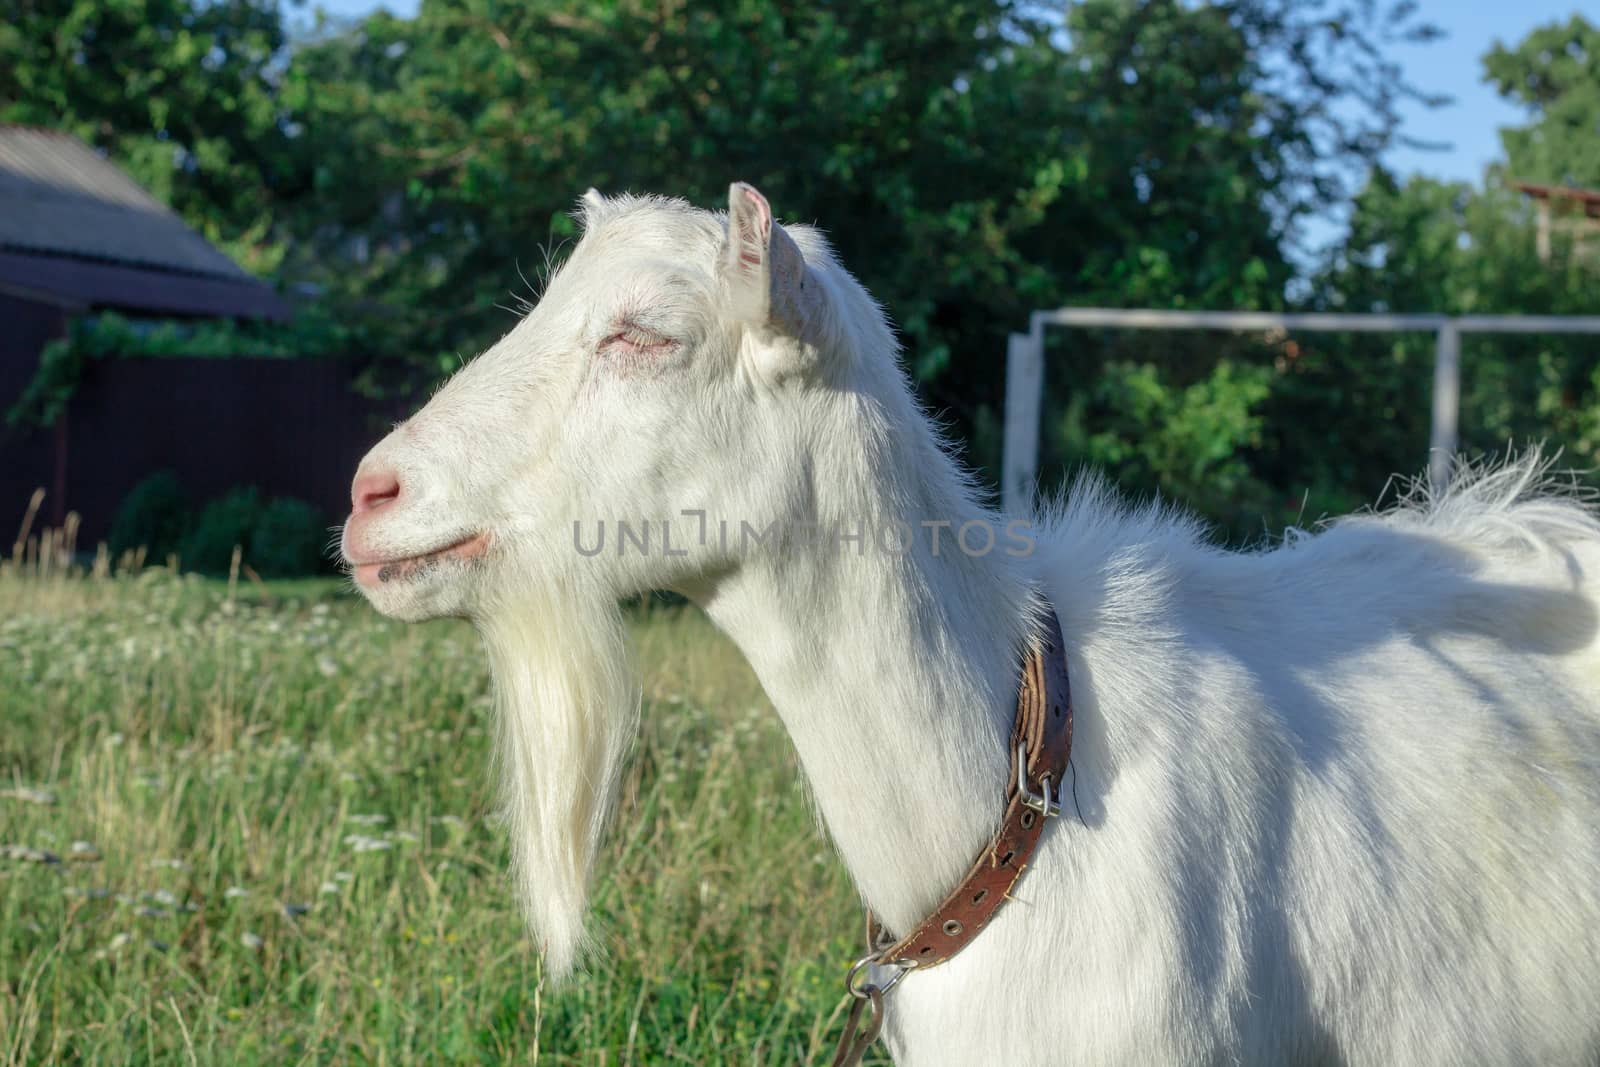 White goat grasses on village field, countryside vacation